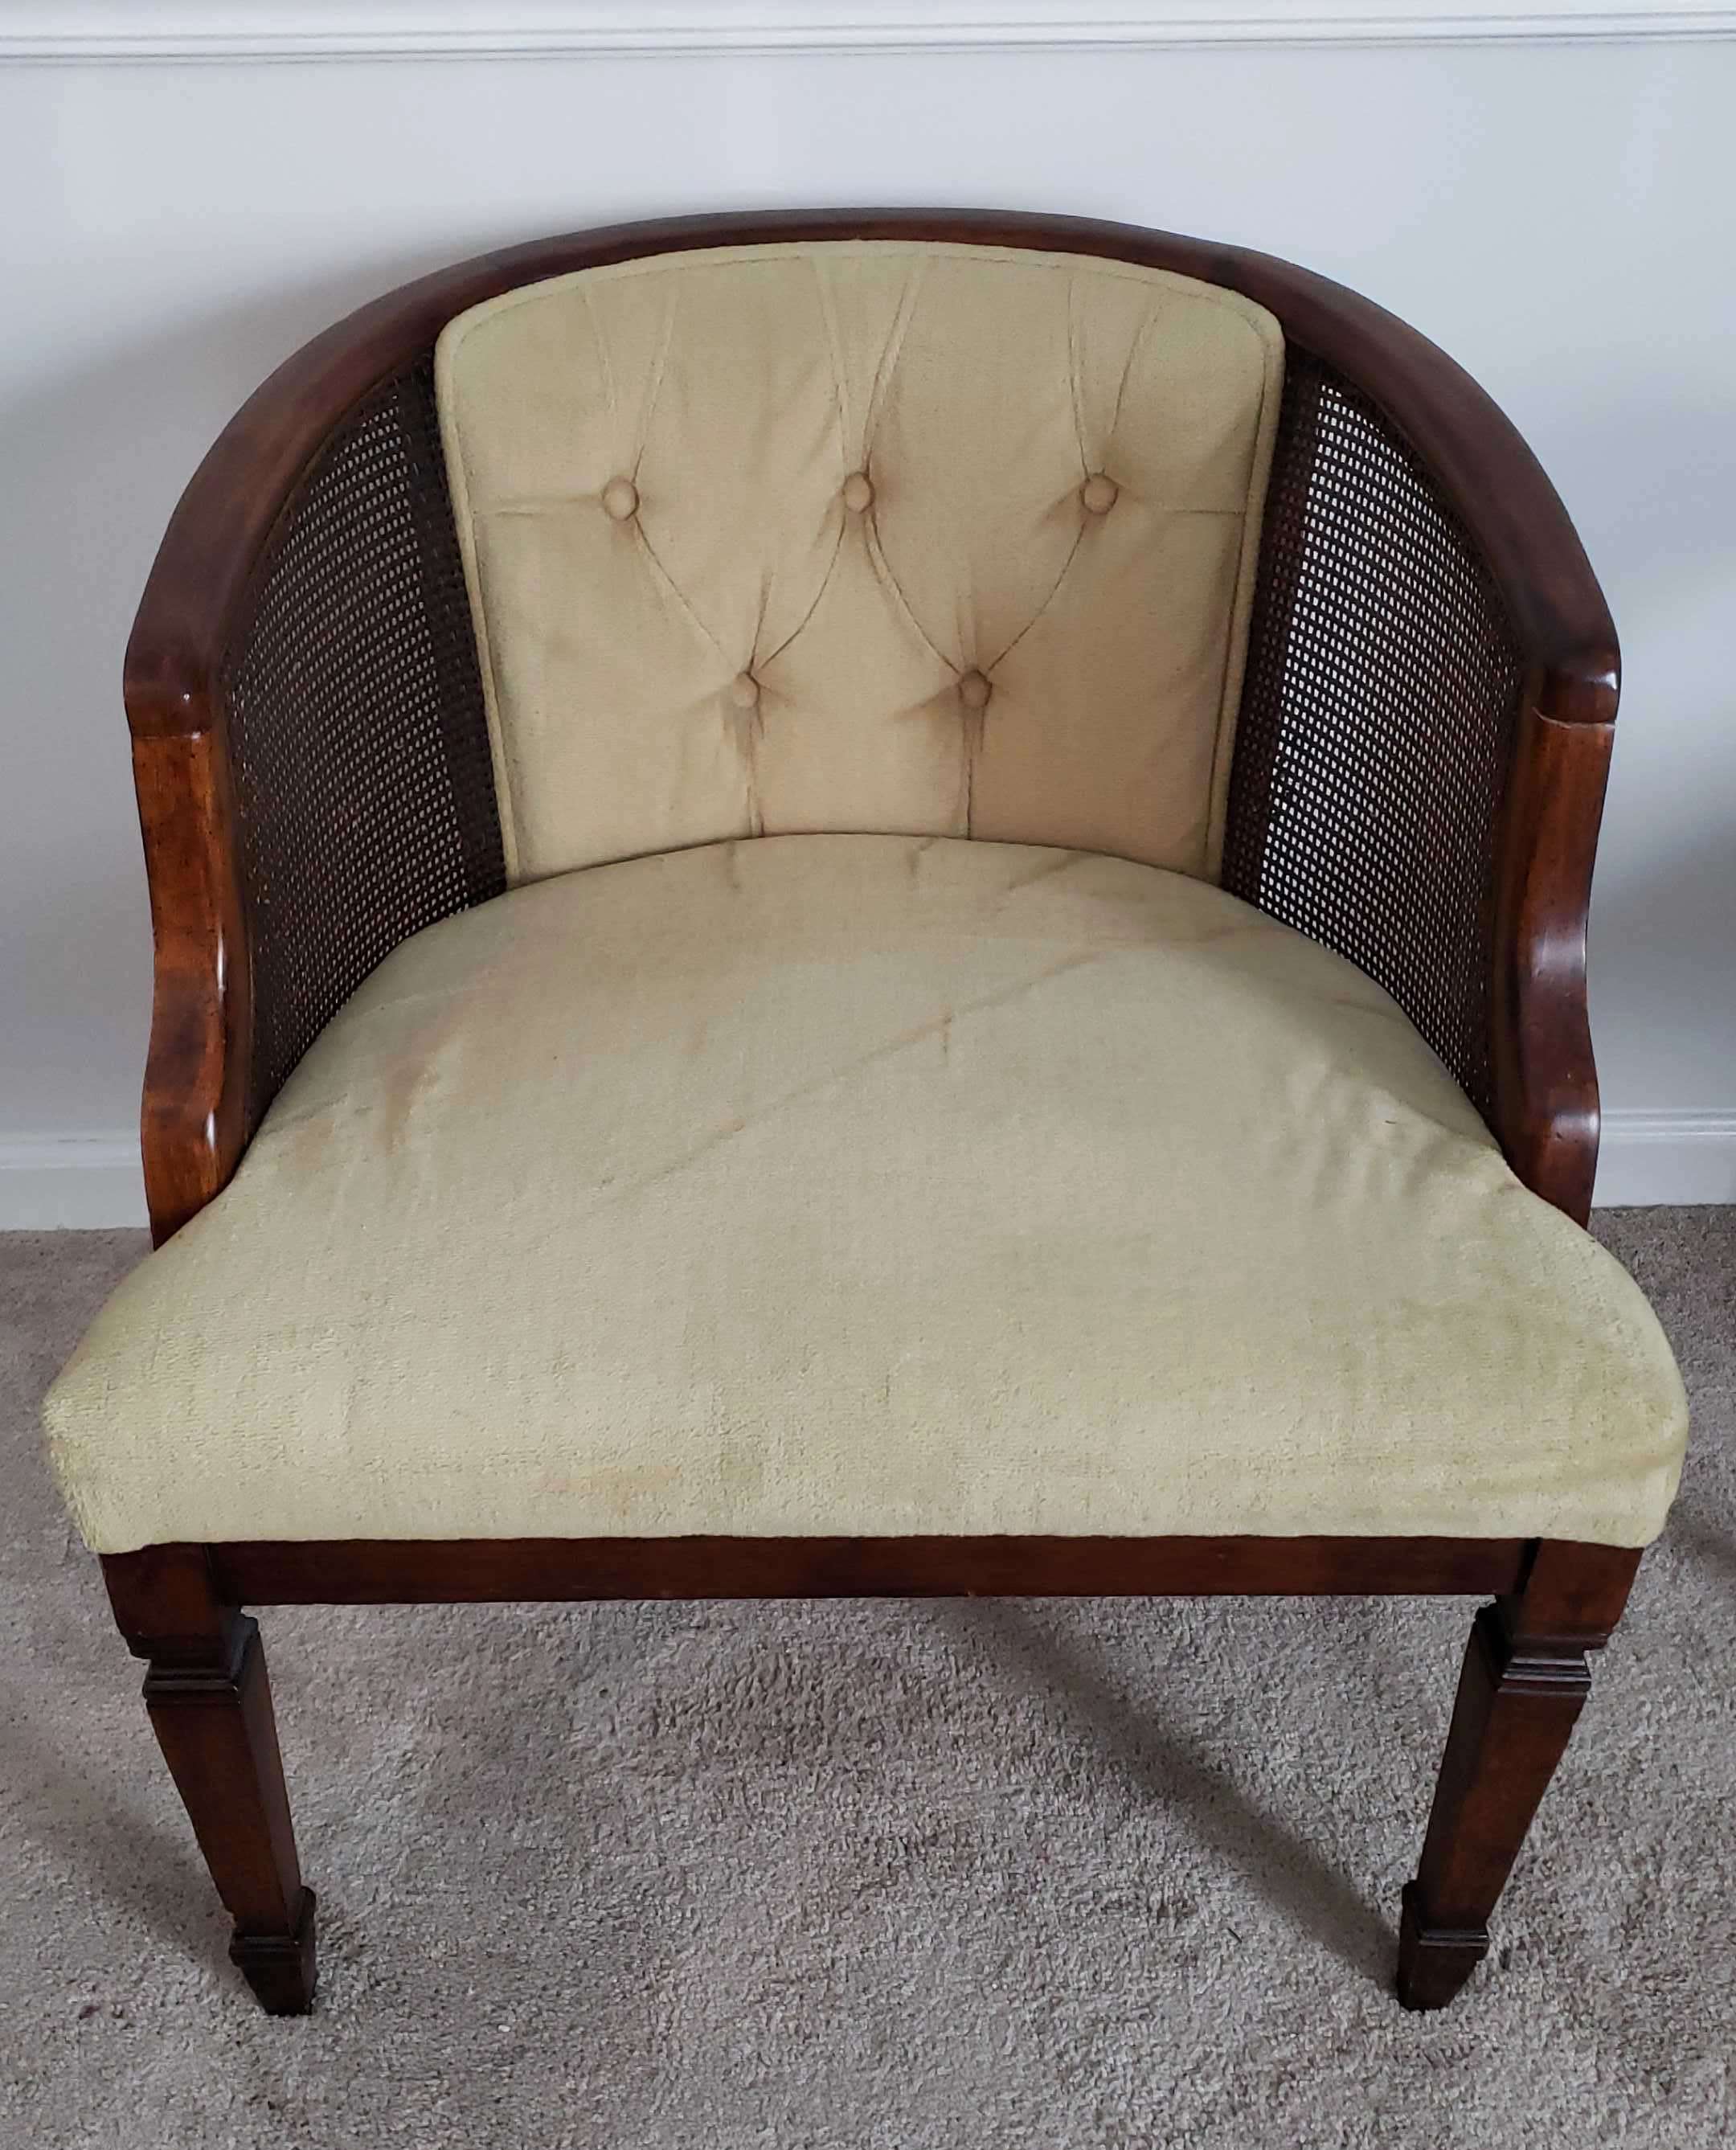 Tufted-Upholstered-Wooden-Club-Chair